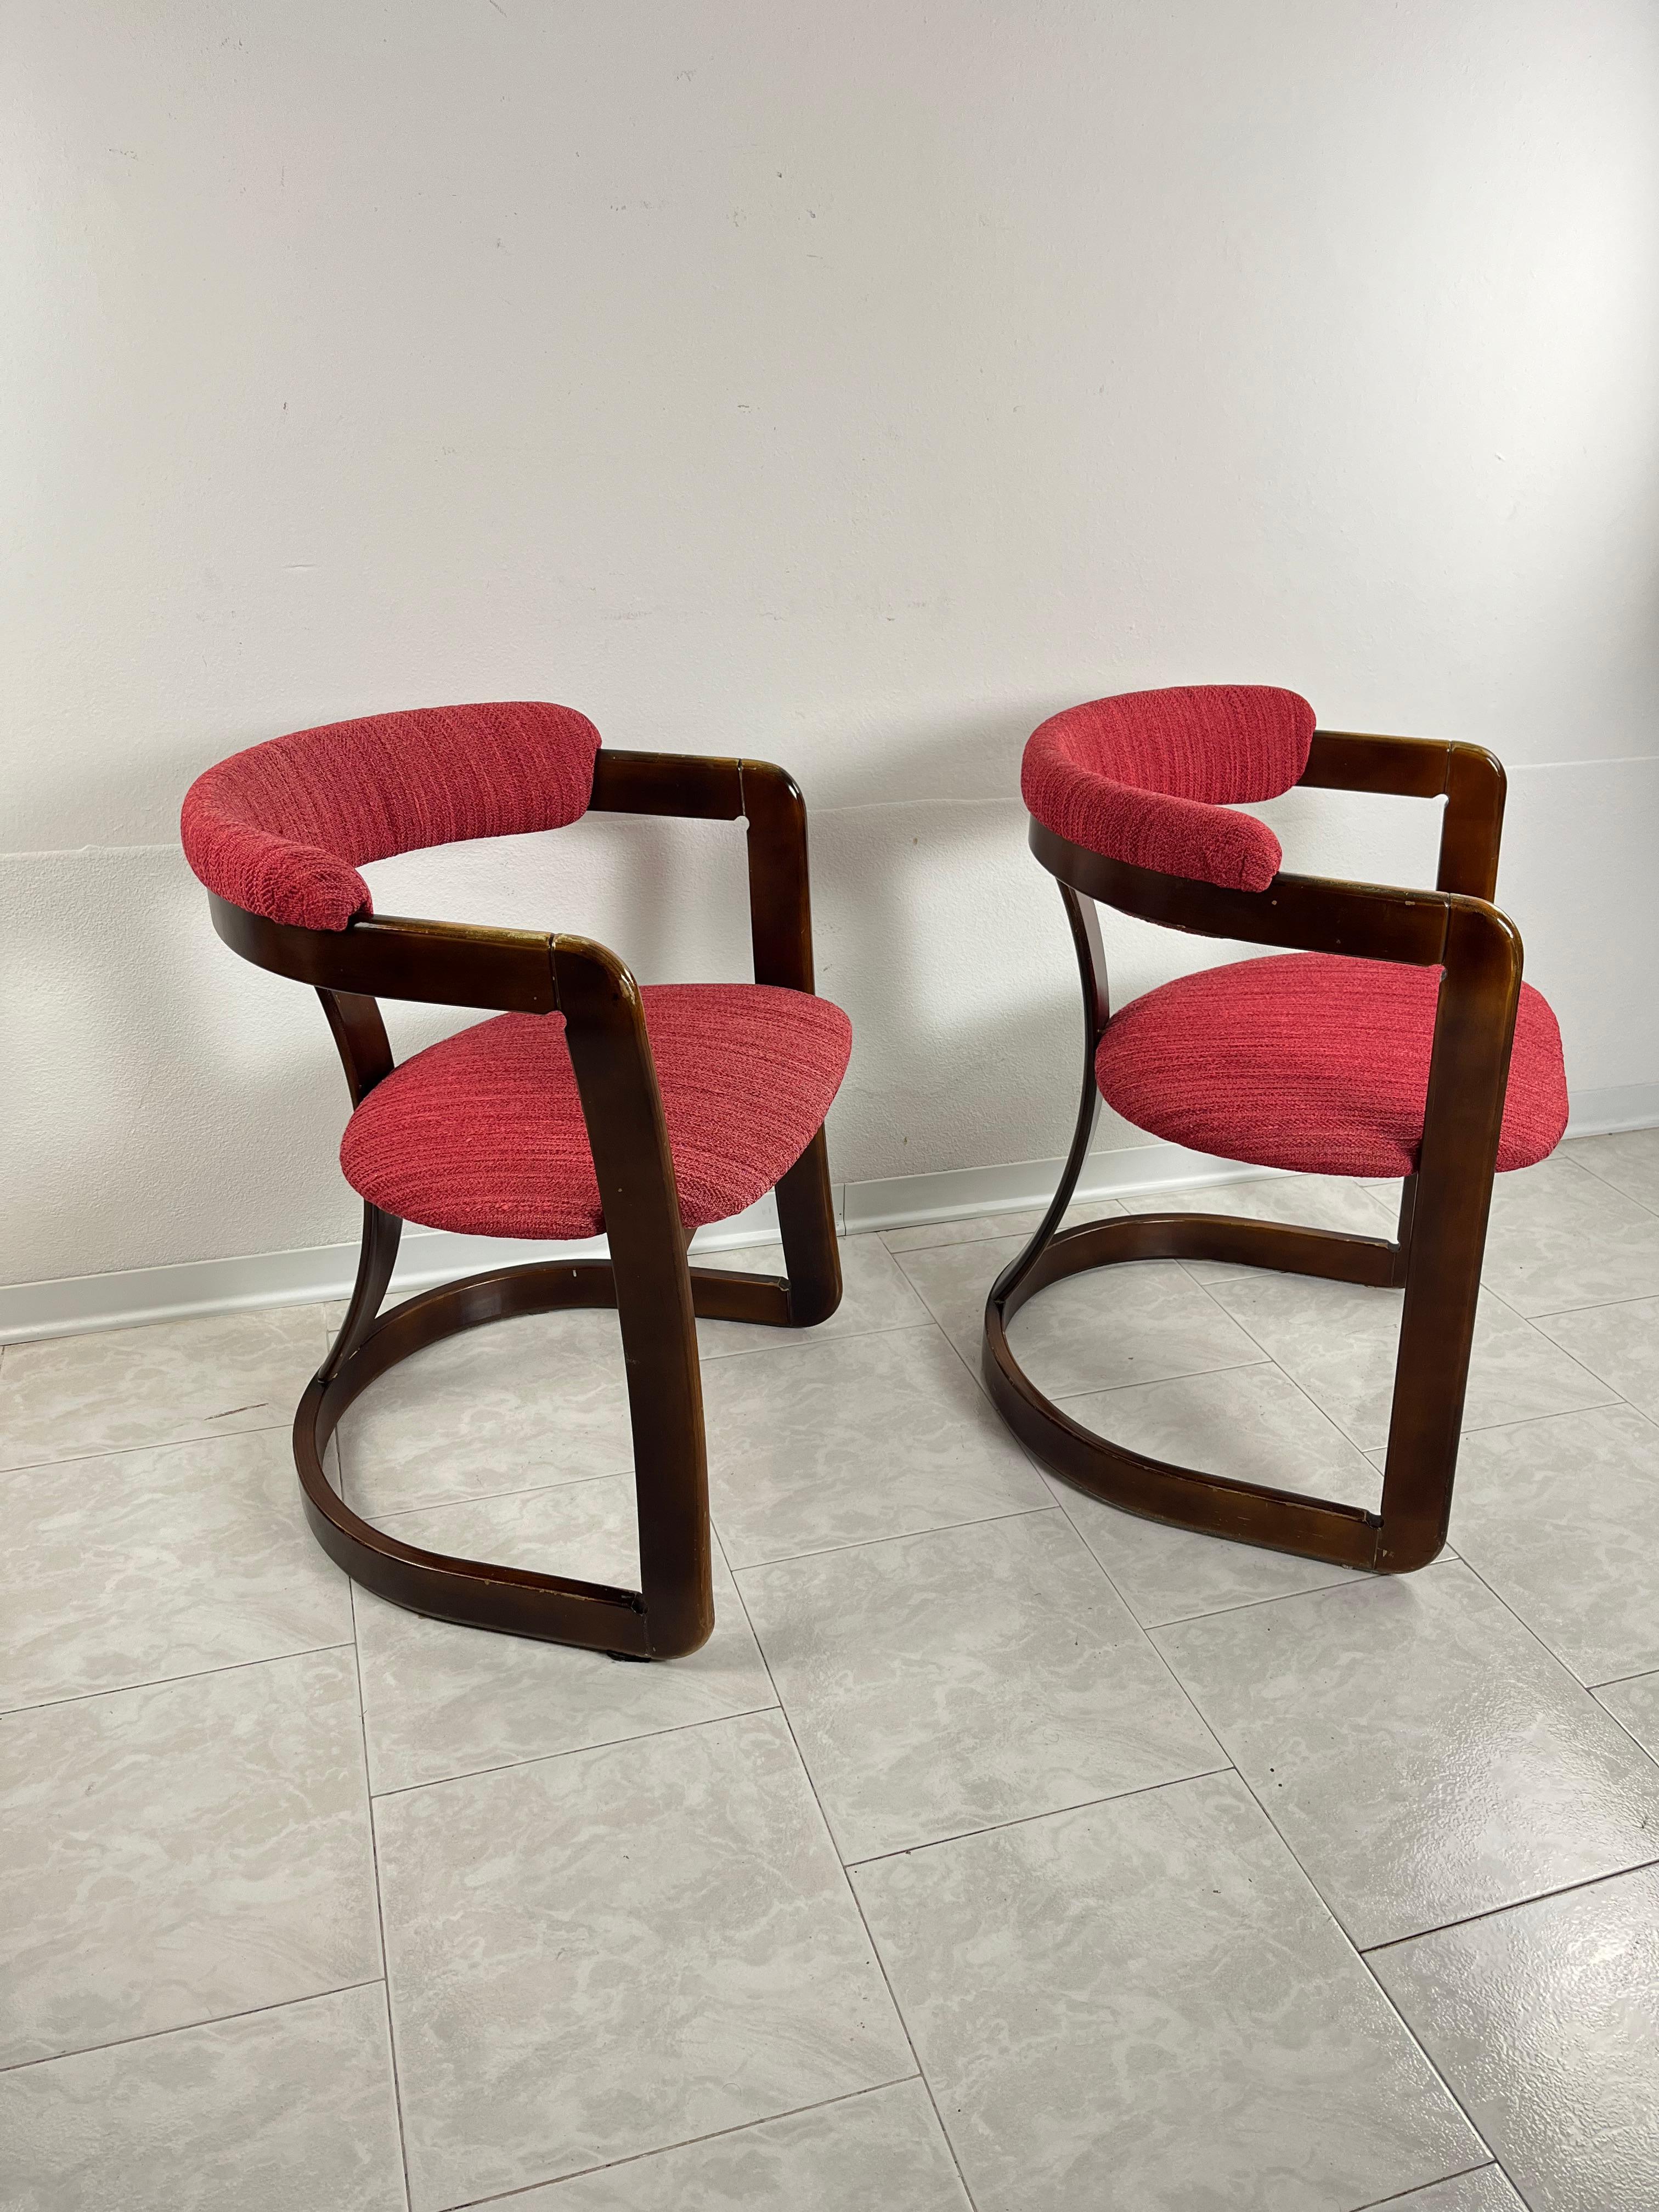 Set of 2 Mid-Century curved wooden chairs attributed to Achille and Piergiacomo Castiglioni, Italian design 1960s
Intact and in good condition, small signs of aging.